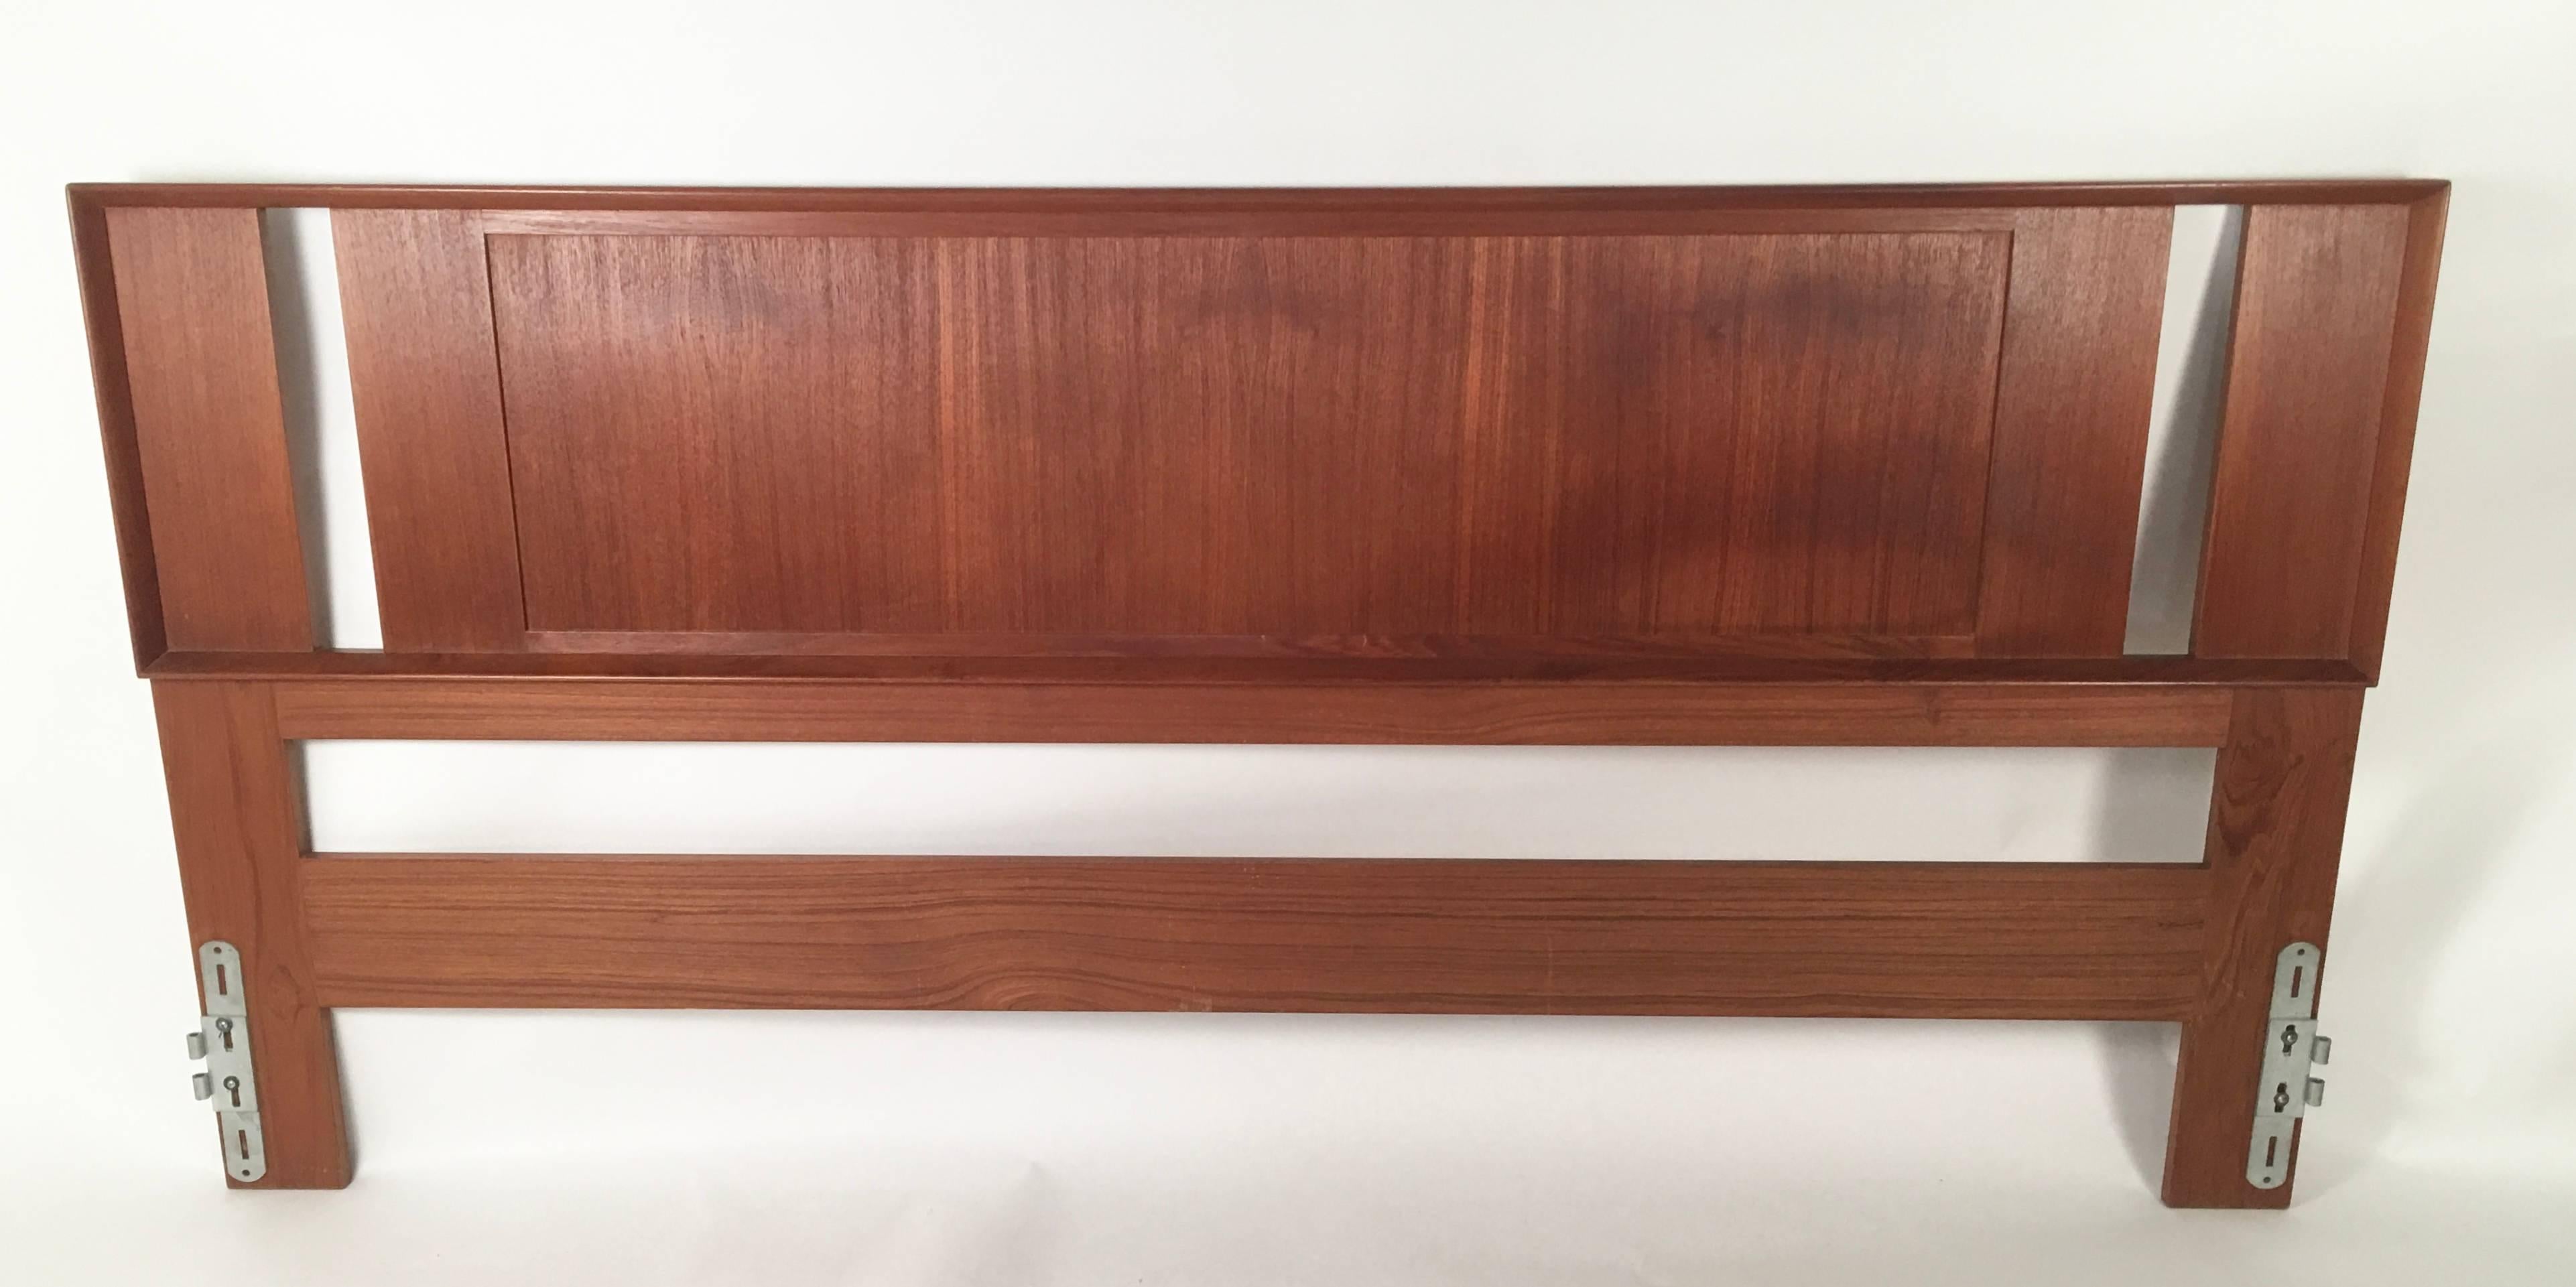 A Danish teak and grass cloth double sided king-sized headboard made by Falster, circa 1960-1970, in perfect condition. Richly figured wood with molded edge on one side and pristine grass cloth panel on the other. This headboard does not require